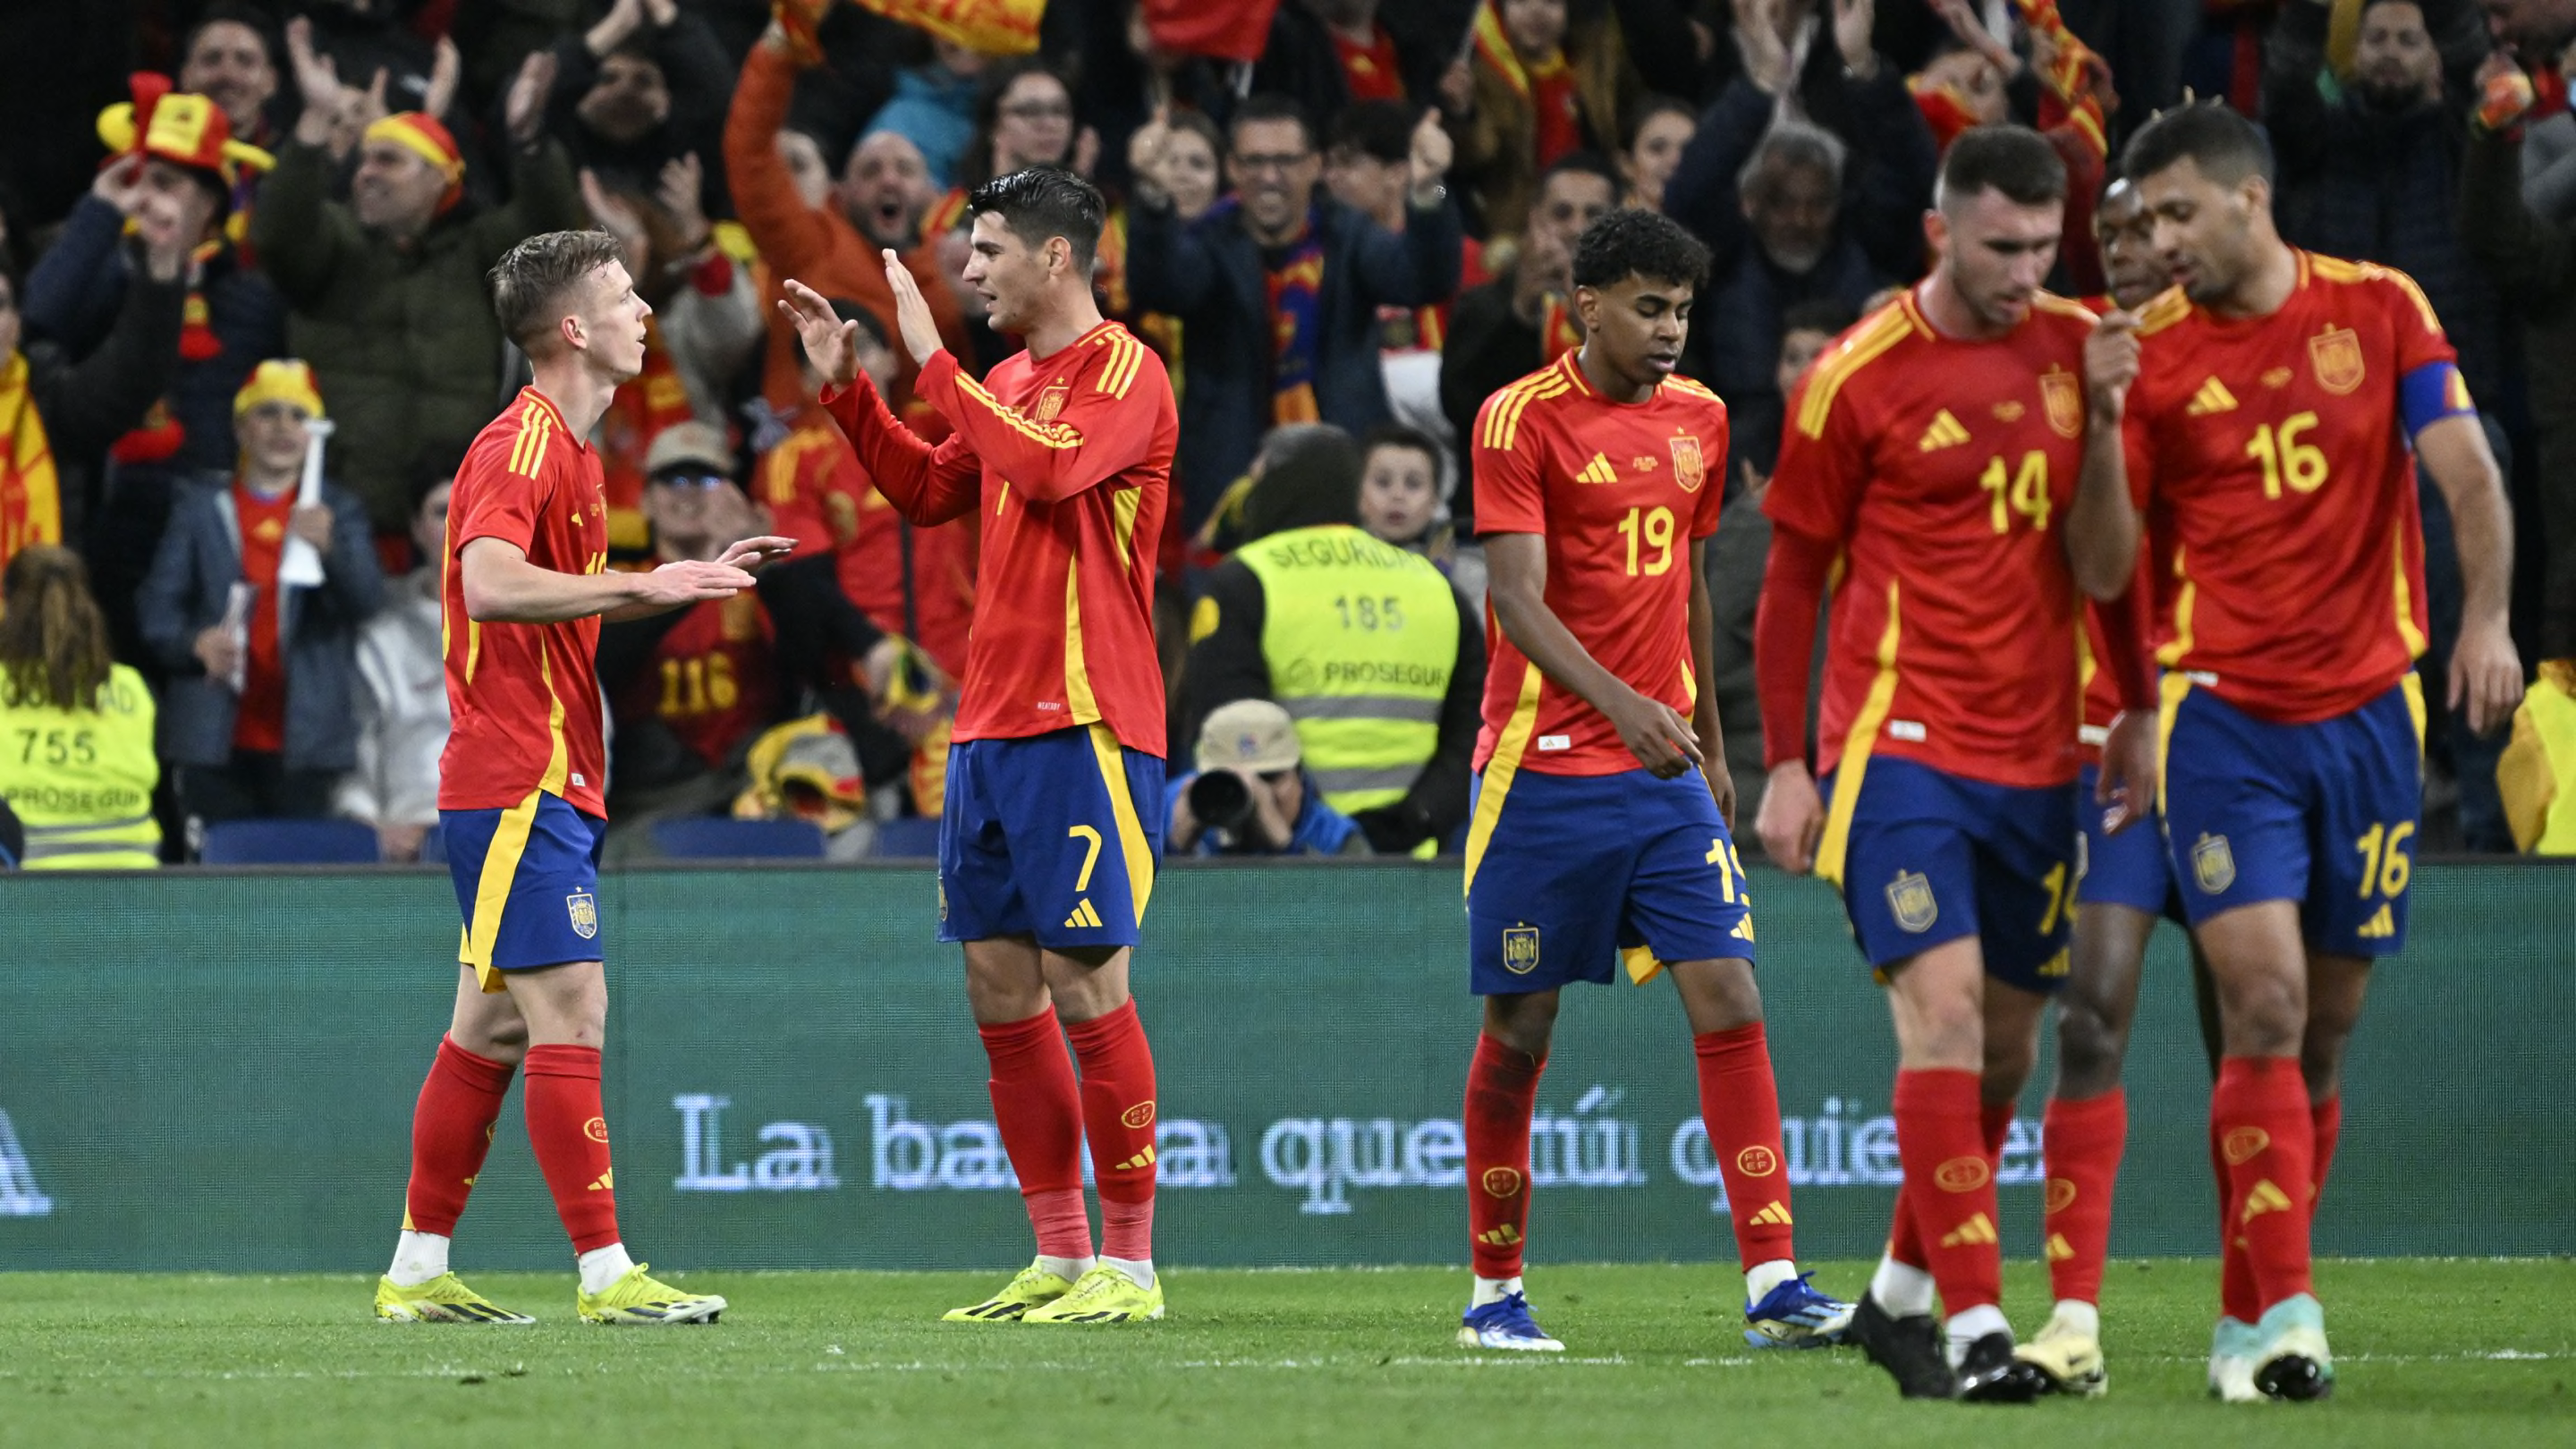 Spain vs Andorra: Preview, predictions and lineups